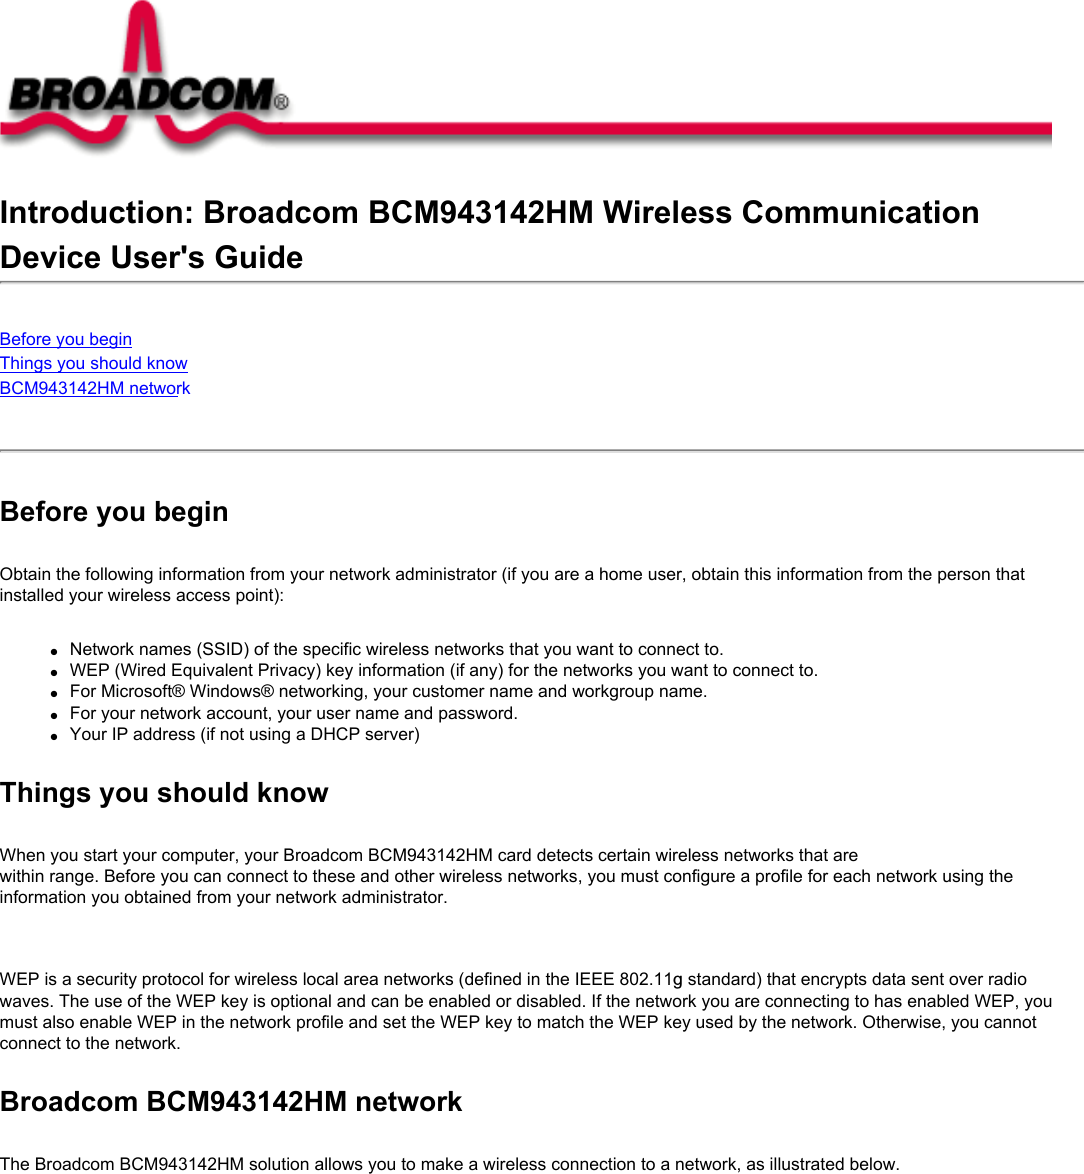 Introduction: Broadcom BCM943142HM Wireless CommunicationDevice User&apos;s GuideBefore you beginThings you should knowBCM943142HM network Before you beginObtain the following information from your network administrator (if you are a home user, obtain this information from the person that installed your wireless access point):●     Network names (SSID) of the specific wireless networks that you want to connect to.●     WEP (Wired Equivalent Privacy) key information (if any) for the networks you want to connect to.●     For Microsoft® Windows® networking, your customer name and workgroup name.●     For your network account, your user name and password.●     Your IP address (if not using a DHCP server)Things you should knowWhen you start your computer, your Broadcom BCM943142HM card detects certain wireless networks that are within range. Before you can connect to these and other wireless networks, you must configure a profile for each network using the information you obtained from your network administrator.   WEP is a security protocol for wireless local area networks (defined in the IEEE 802.11g standard) that encrypts data sent over radio waves. The use of the WEP key is optional and can be enabled or disabled. If the network you are connecting to has enabled WEP, you must also enable WEP in the network profile and set the WEP key to match the WEP key used by the network. Otherwise, you cannot connect to the network.Broadcom BCM943142HM networkThe Broadcom BCM943142HM solution allows you to make a wireless connection to a network, as illustrated below.